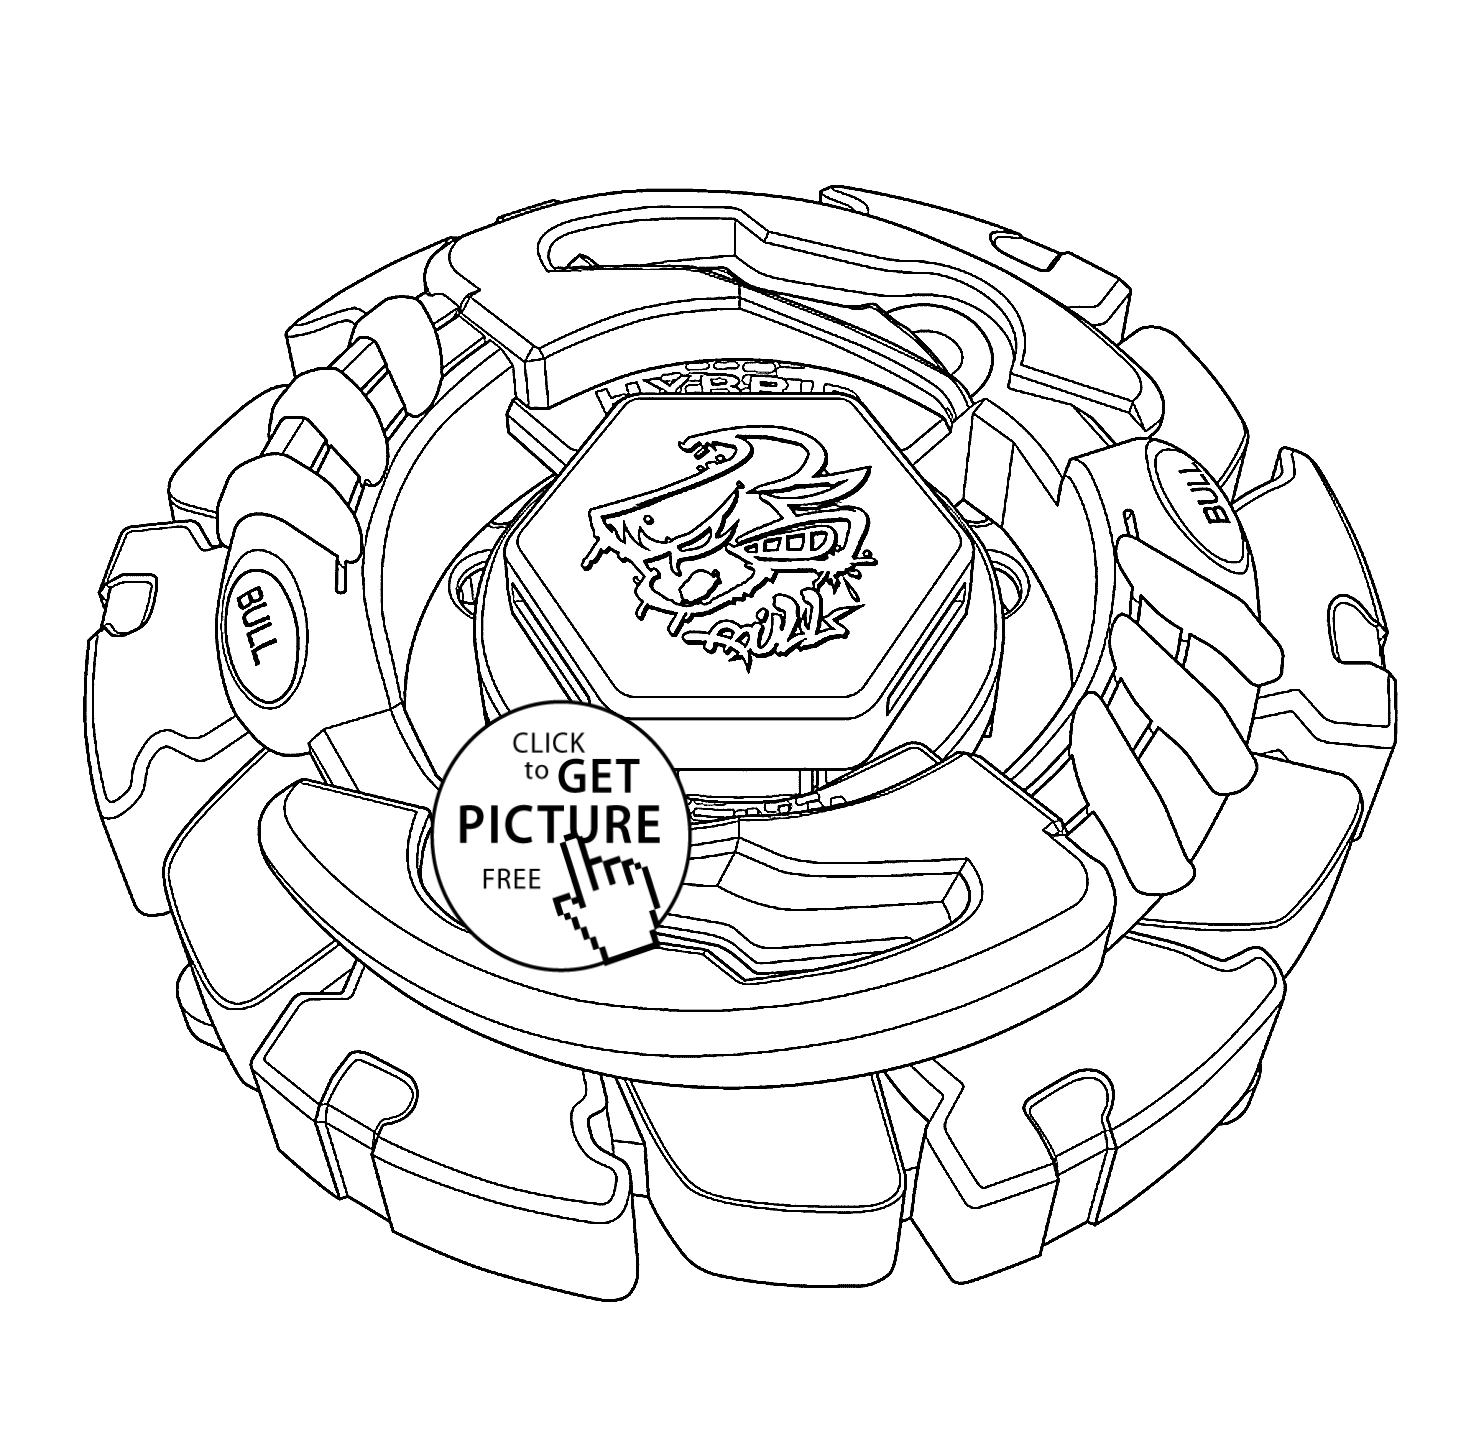 Beyblade coloring pages for kids, printable free